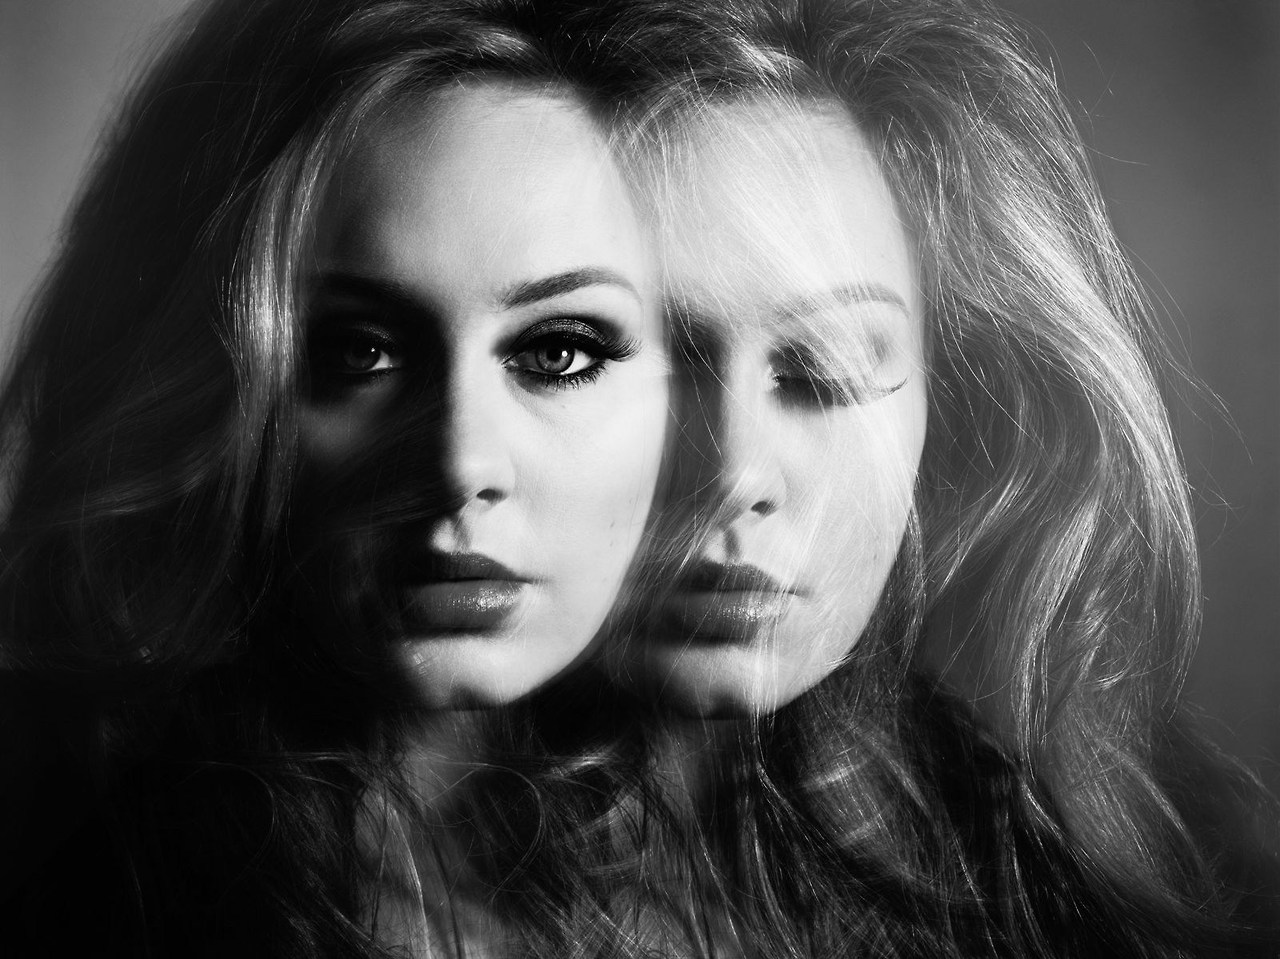 Adele To Release New Album In November | Music News - Conversations About Her